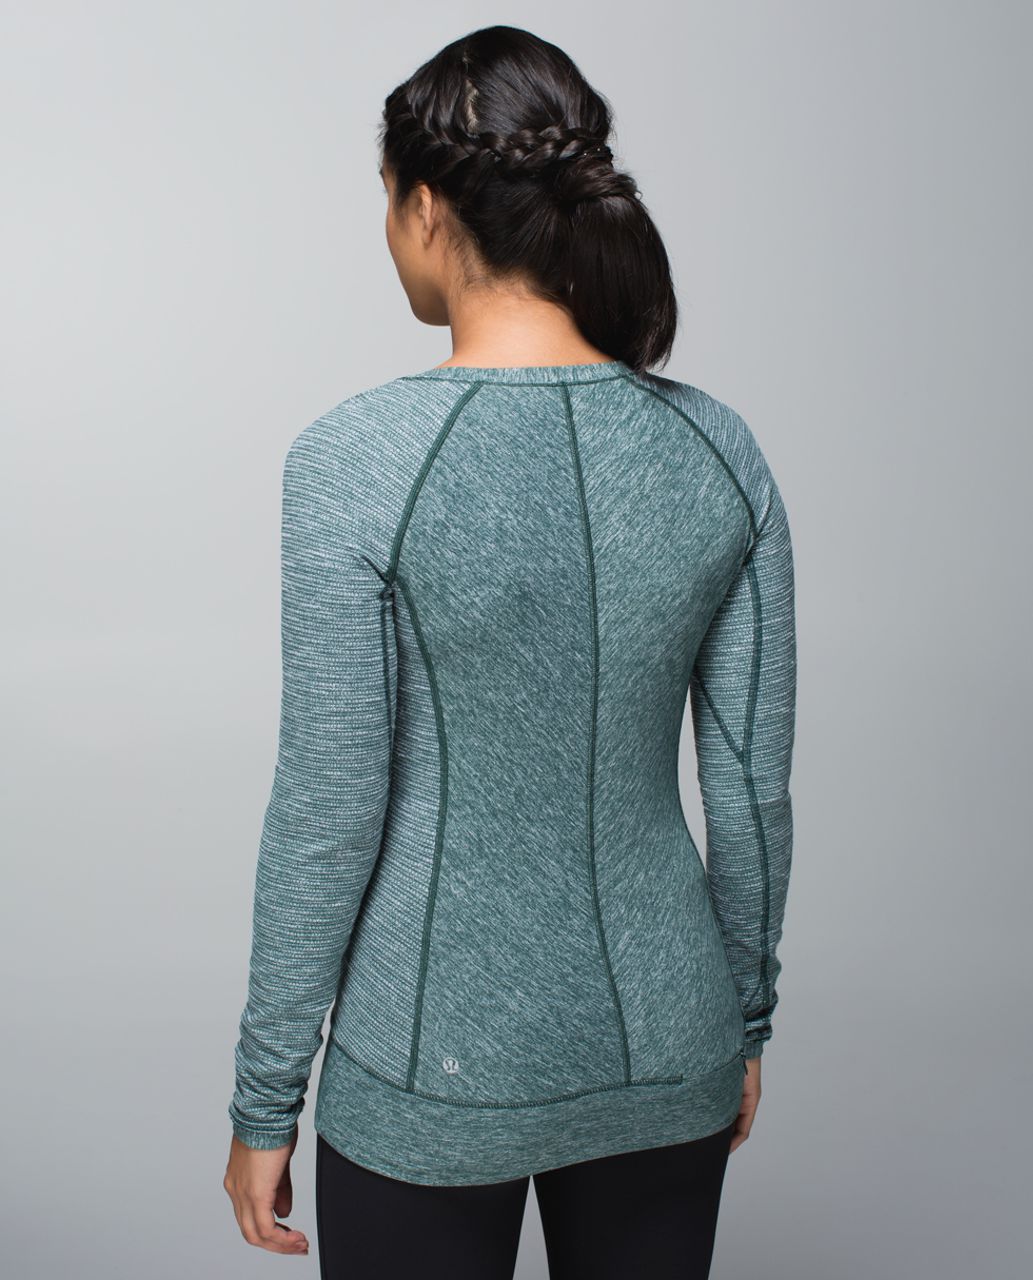 Lululemon Race Your Pace Long Sleeve - Heathered Fuel Green / Coco Pique Fuel Green